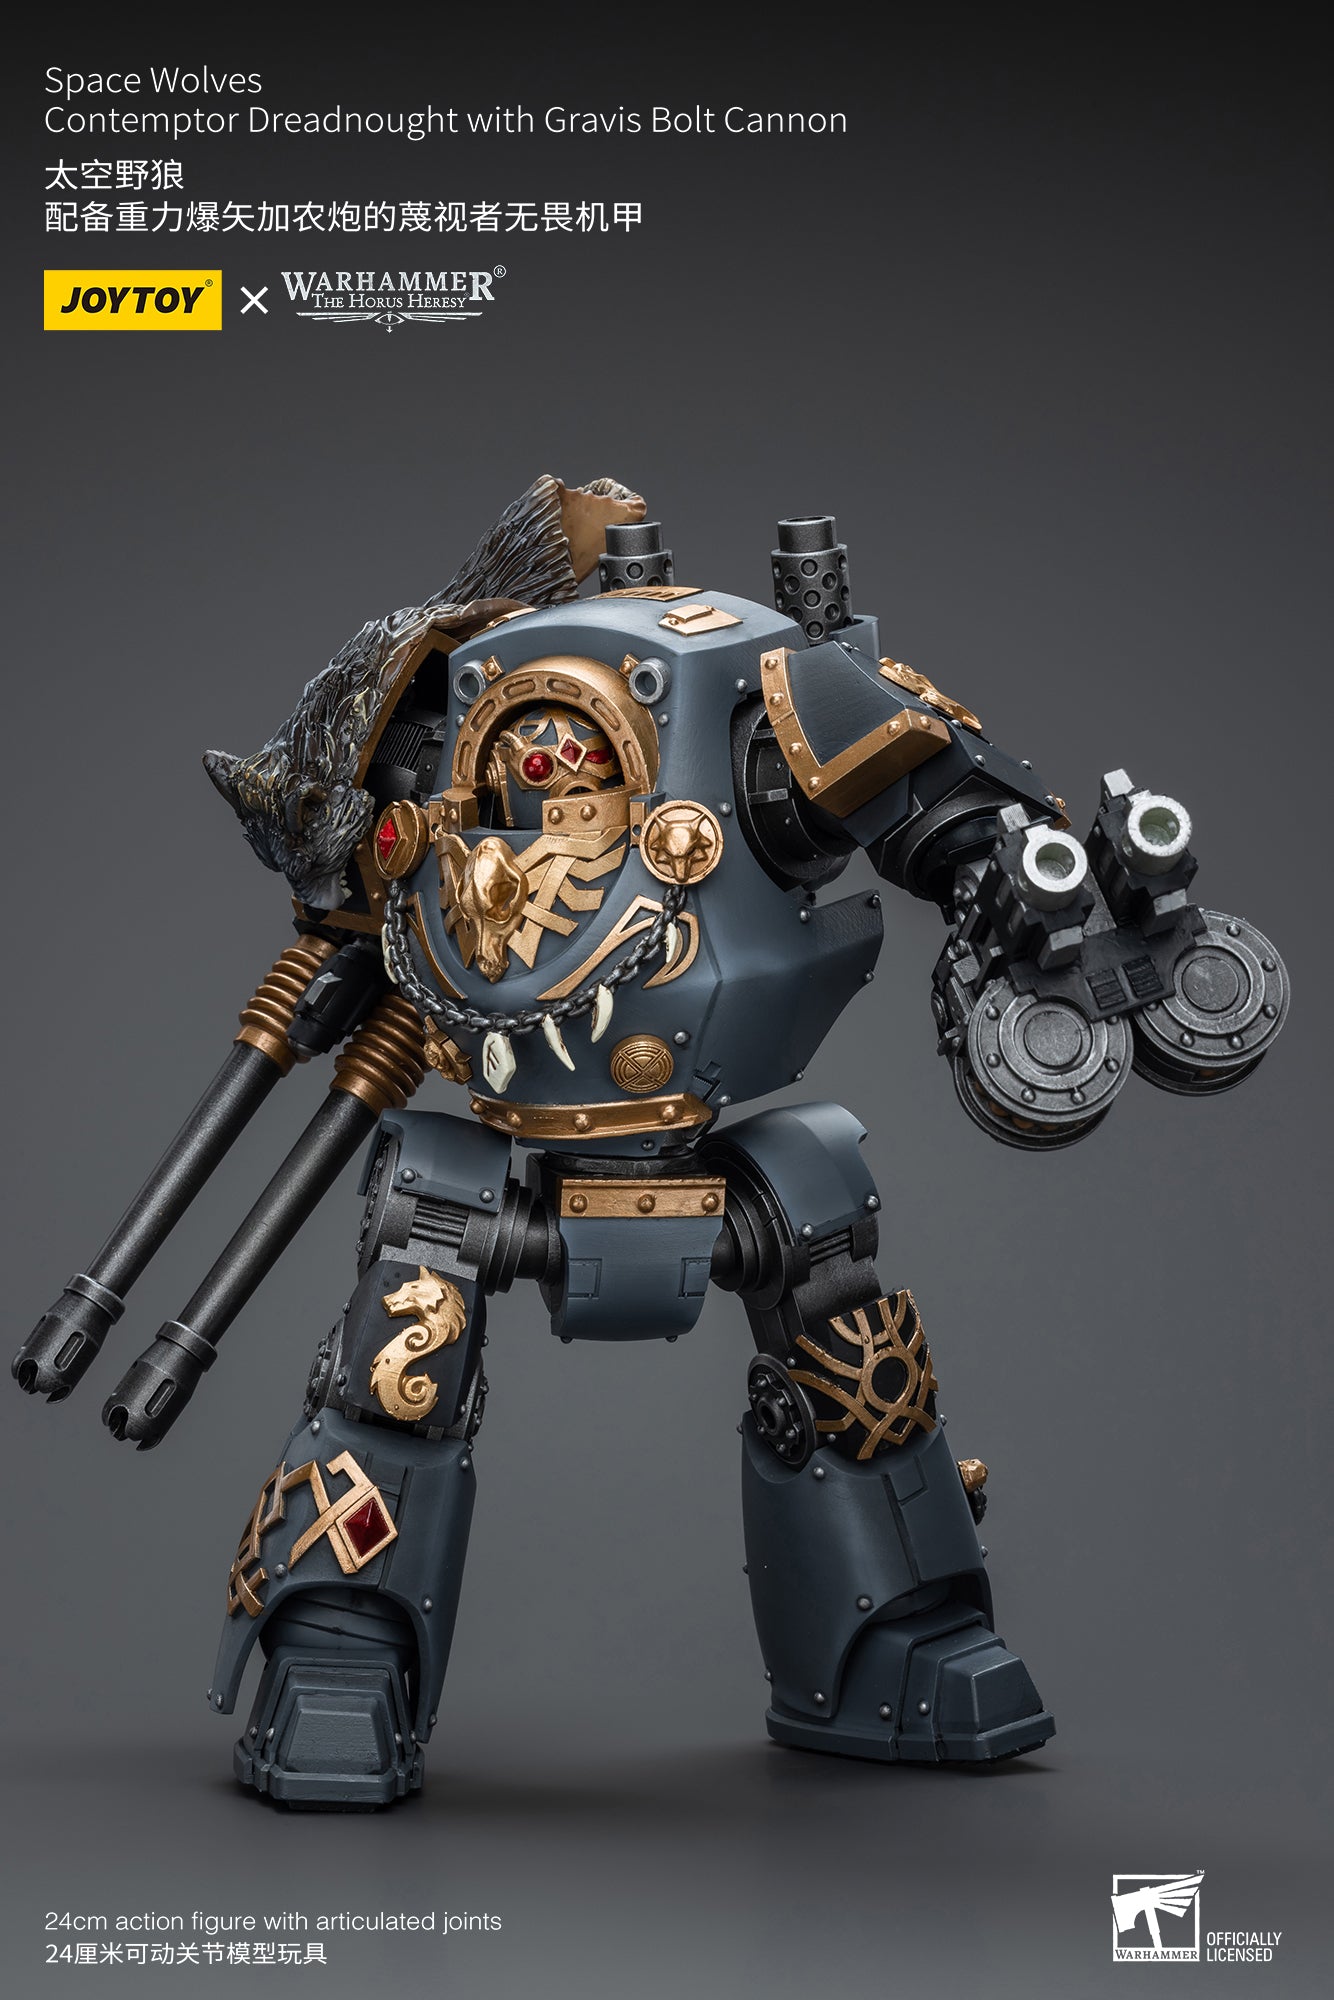 Warhammer: Horus Heresy: Space Wolves: Contemptor Dreadnought with Gravis Bolt Cannon: Joy Toy